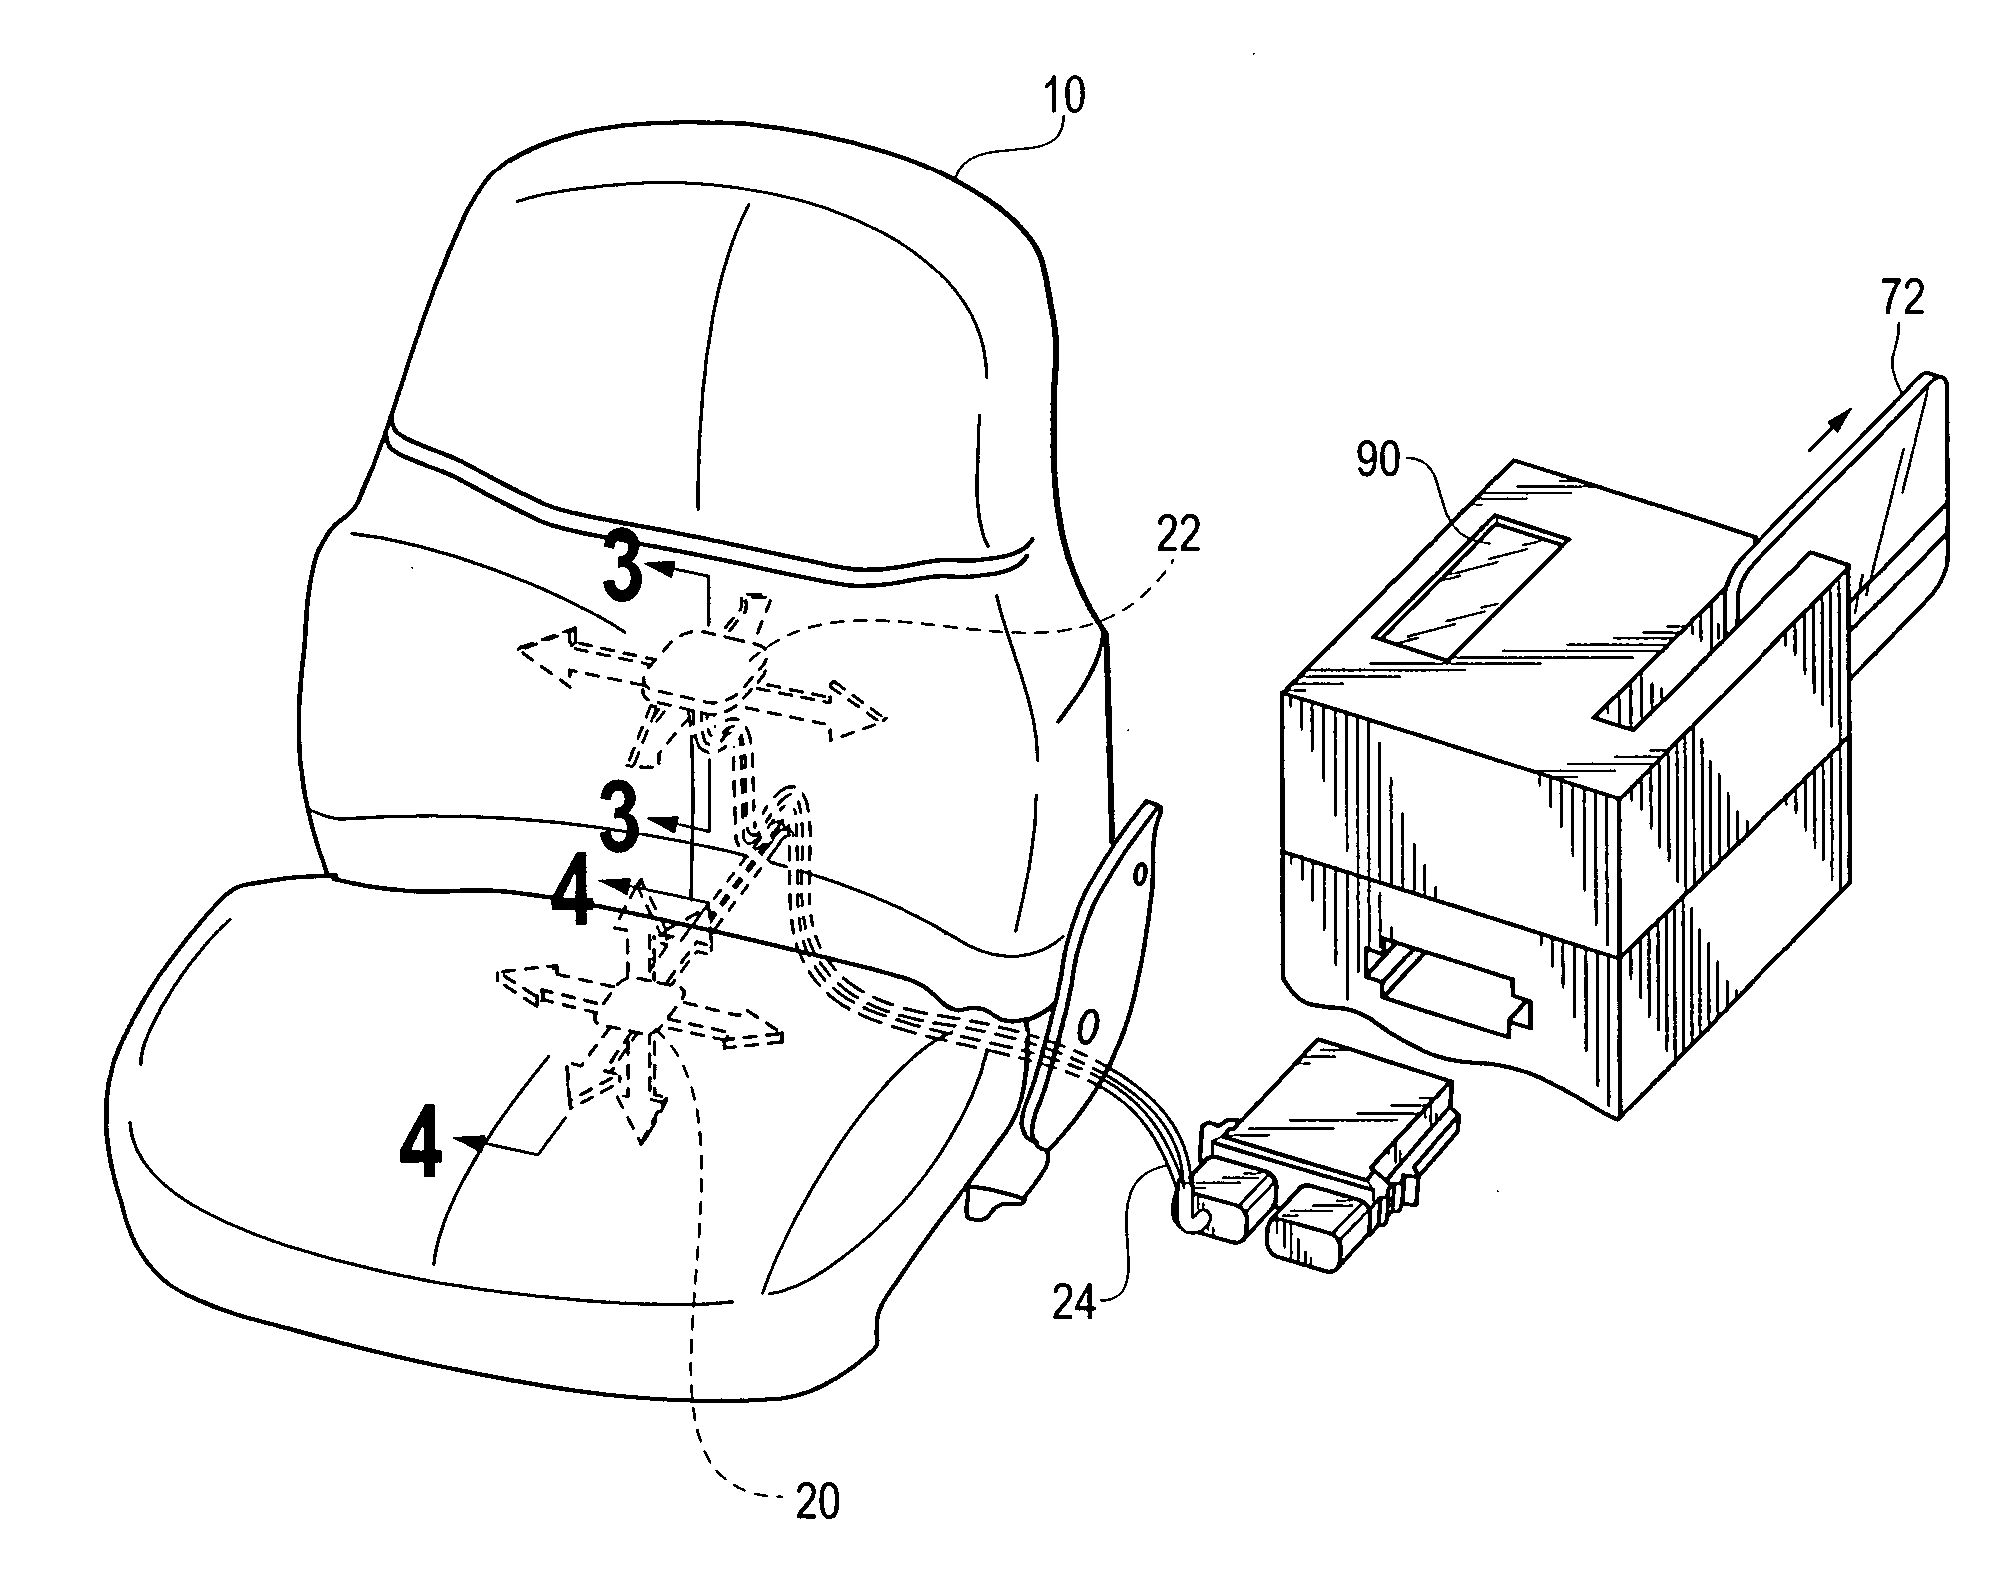 Vehicle seat with vibration monitoring ability